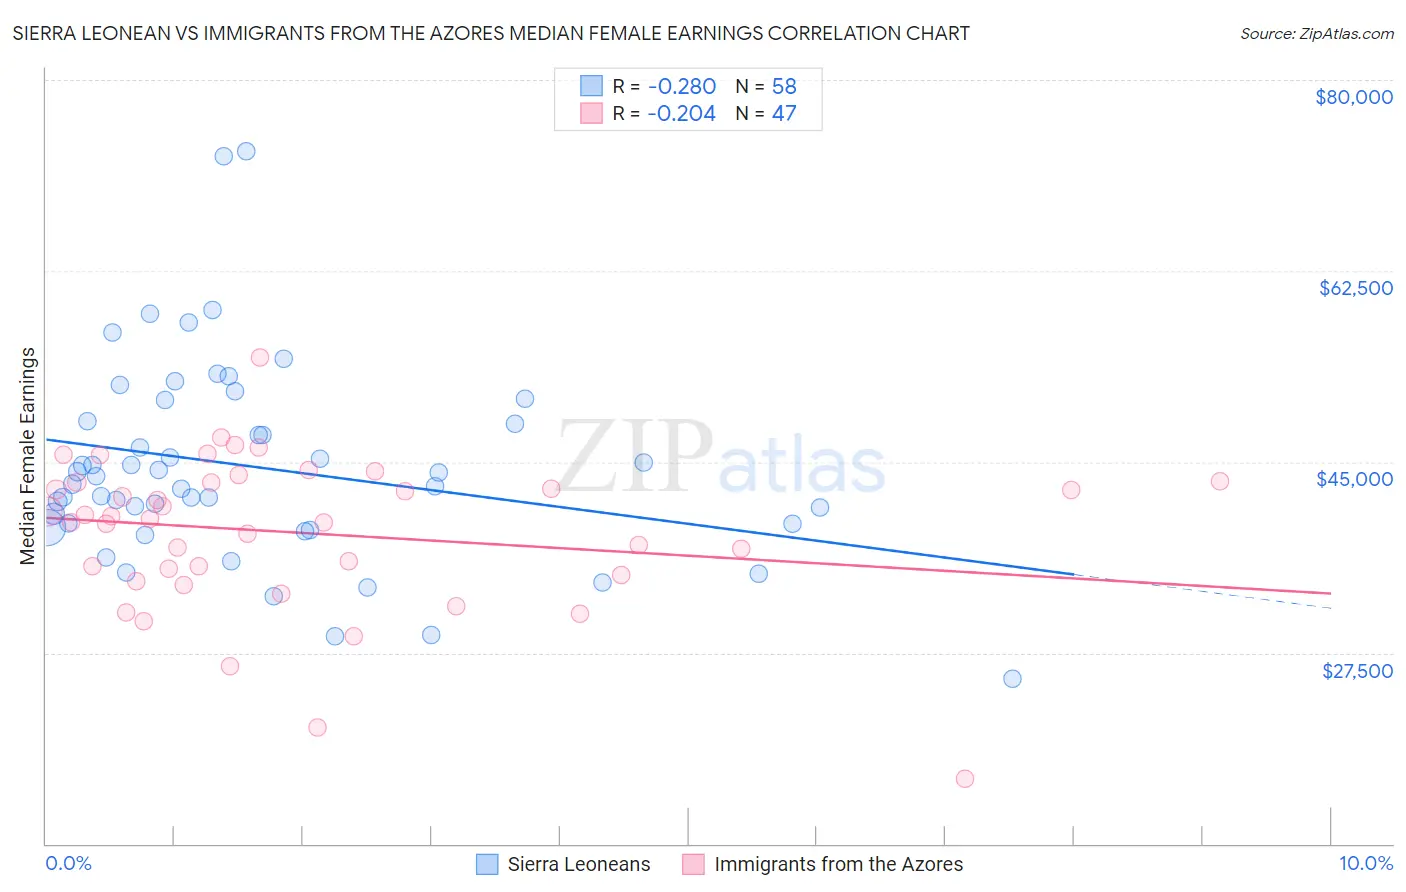 Sierra Leonean vs Immigrants from the Azores Median Female Earnings